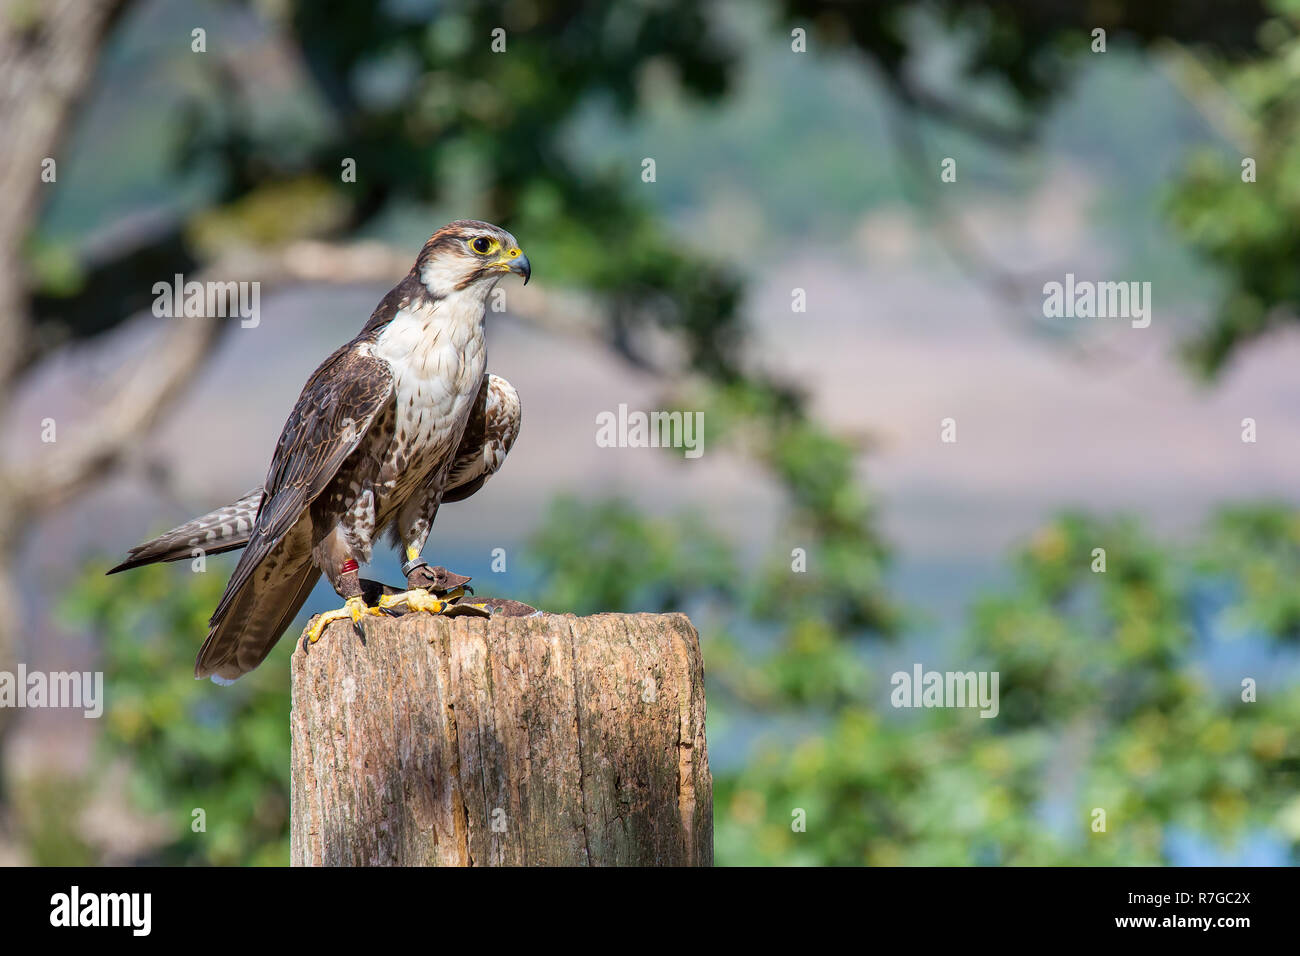 Tame peregrine falcon sitting on a pole in nature Stock Photo